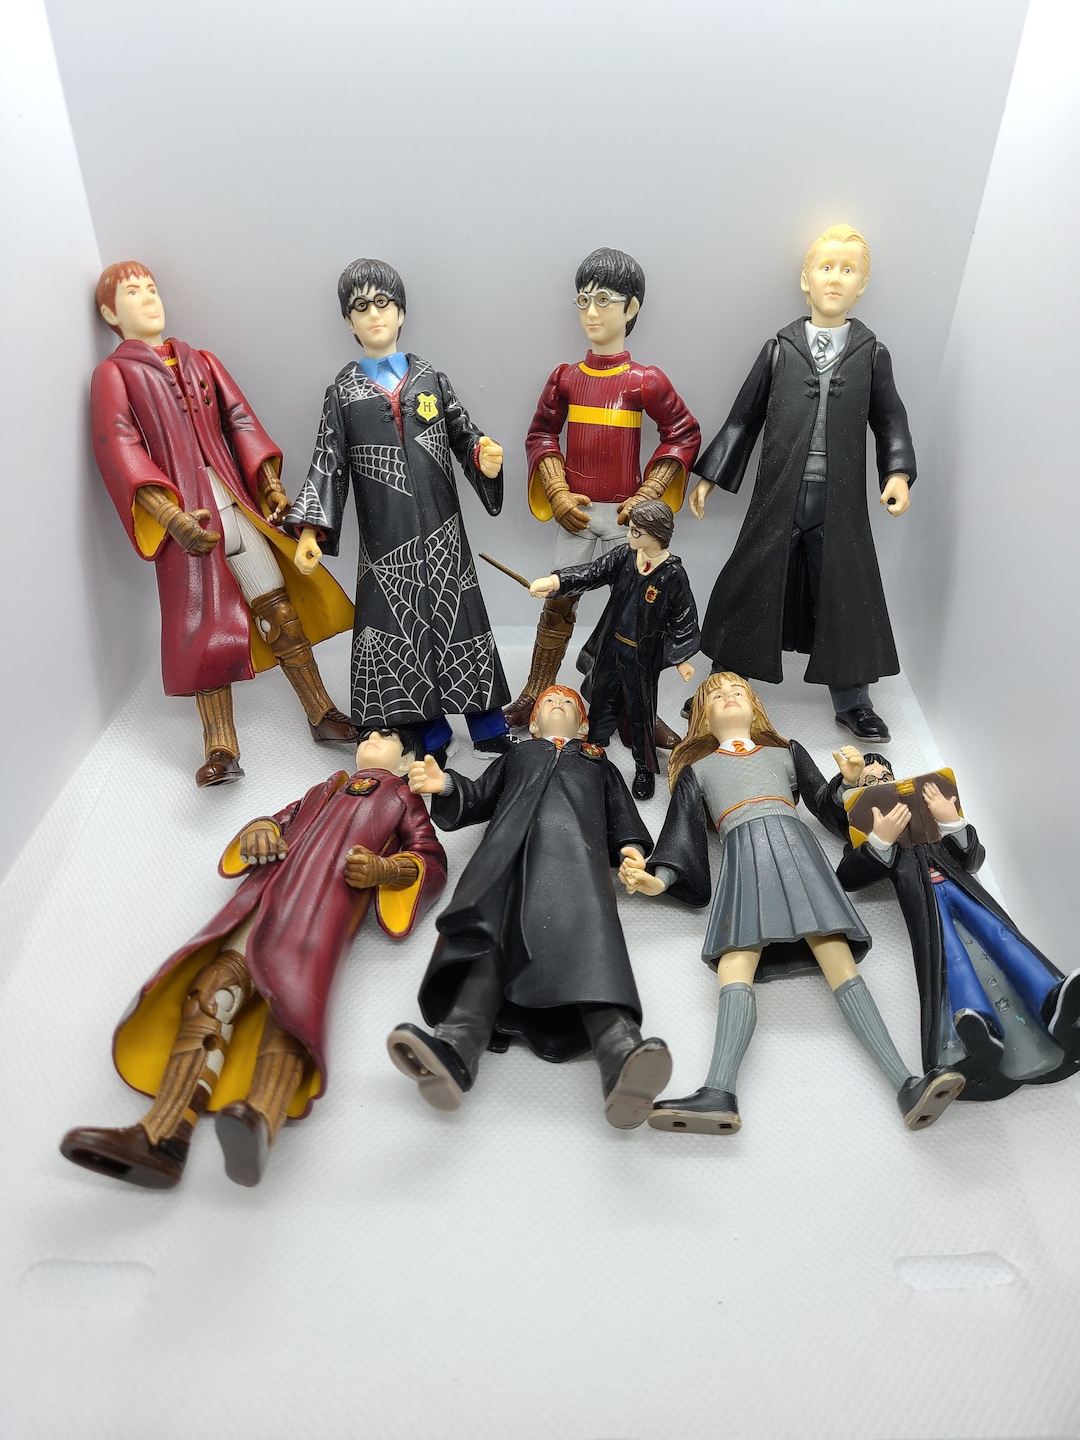 PLAYMOBIL HARRY POTTER CUSTOMIZED FIGURES W/ RON, HERMIONE AND HEDWIG,  ANIMALS